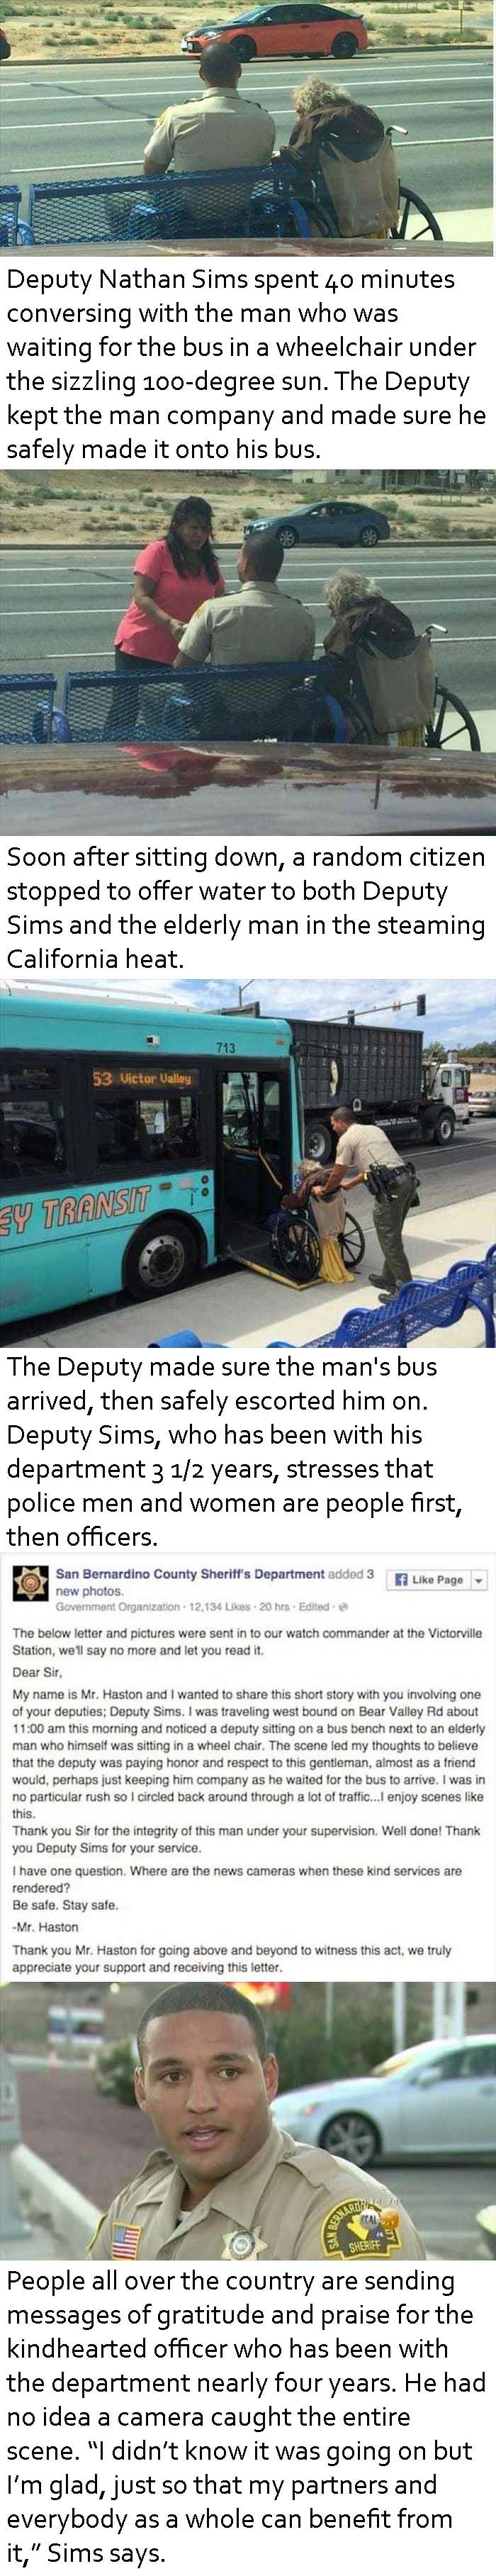 Faith In Humanity Restored - 12 Images